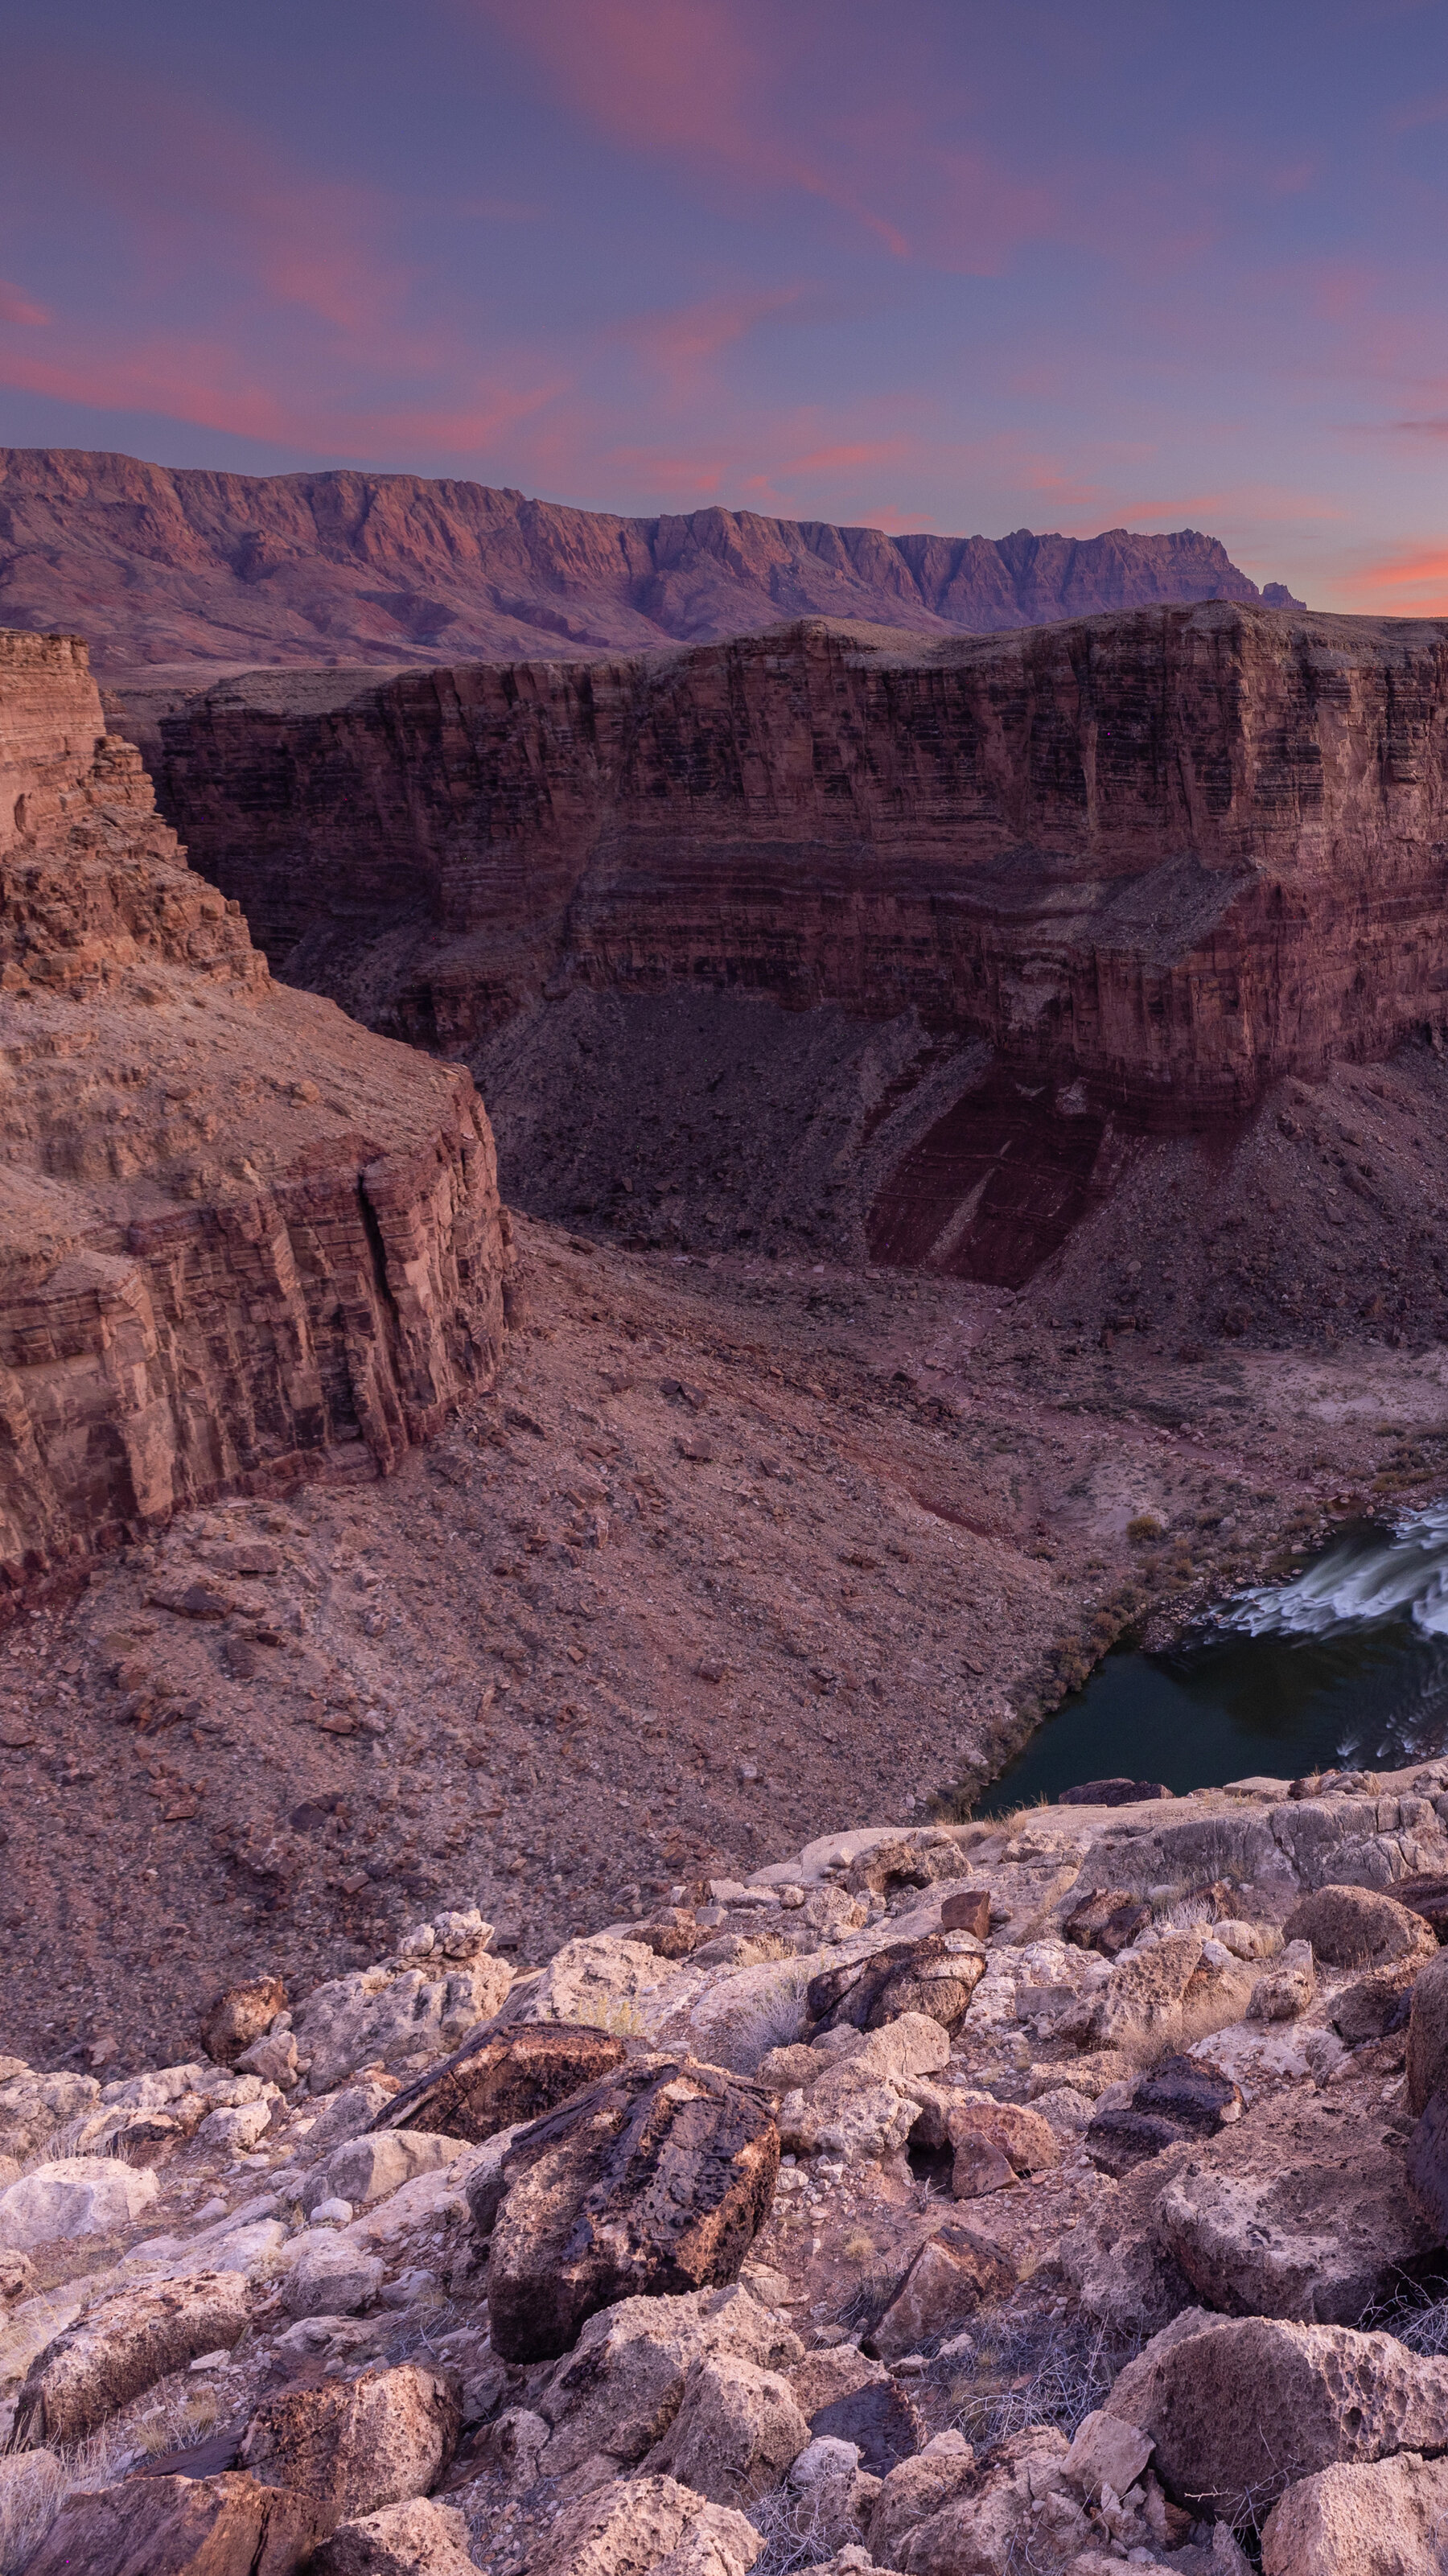 A wide river runs through the base of an immense canyon, which steeps cliffs leaving down to the water far below. The sky is a gradient of blues and pinks, and the light colors the canyon walls, giving the entire picture a rich and warm tone.